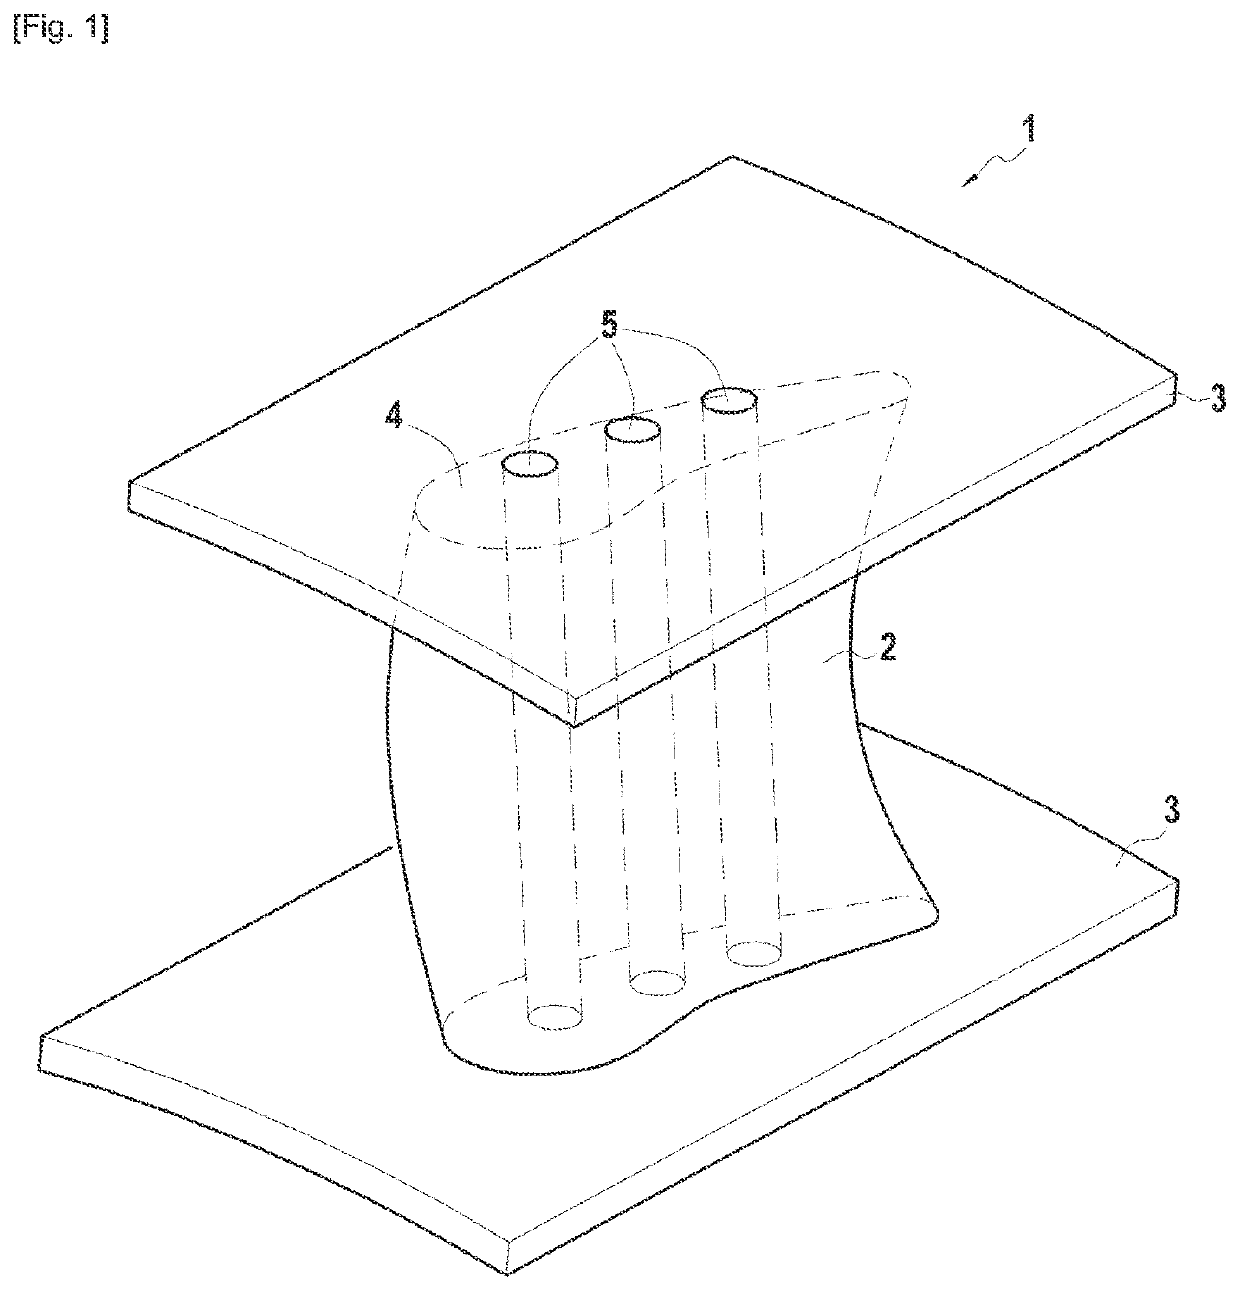 Method for manufacturing a metal part